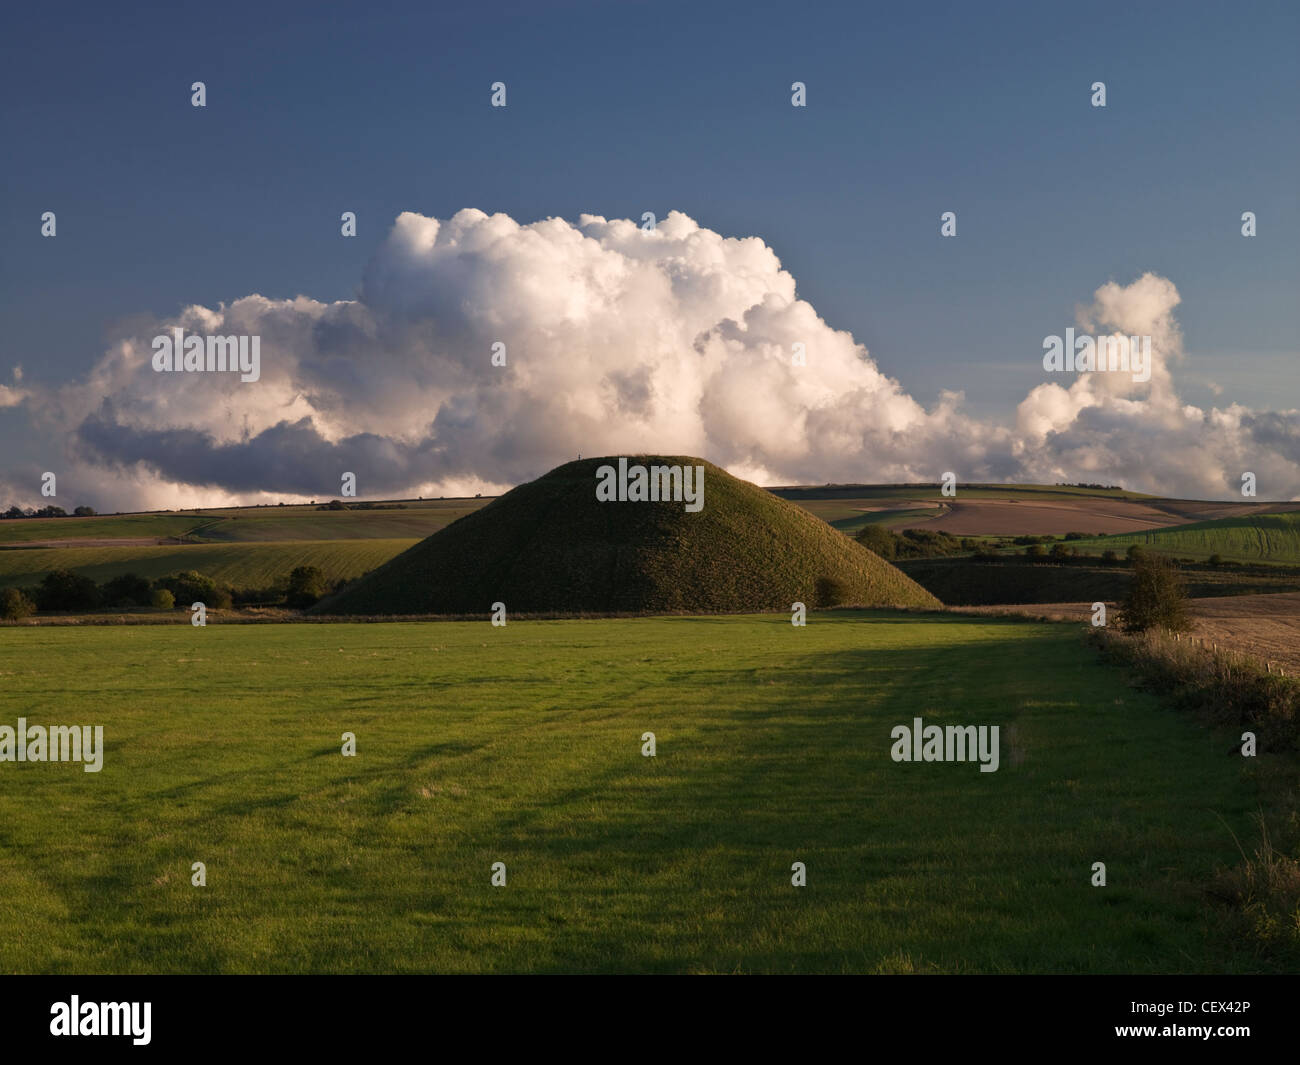 View of Silbury Hill, the tallest prehistoric human-made mound in Europe, against a bank of cloud on a clear evening. Stock Photo